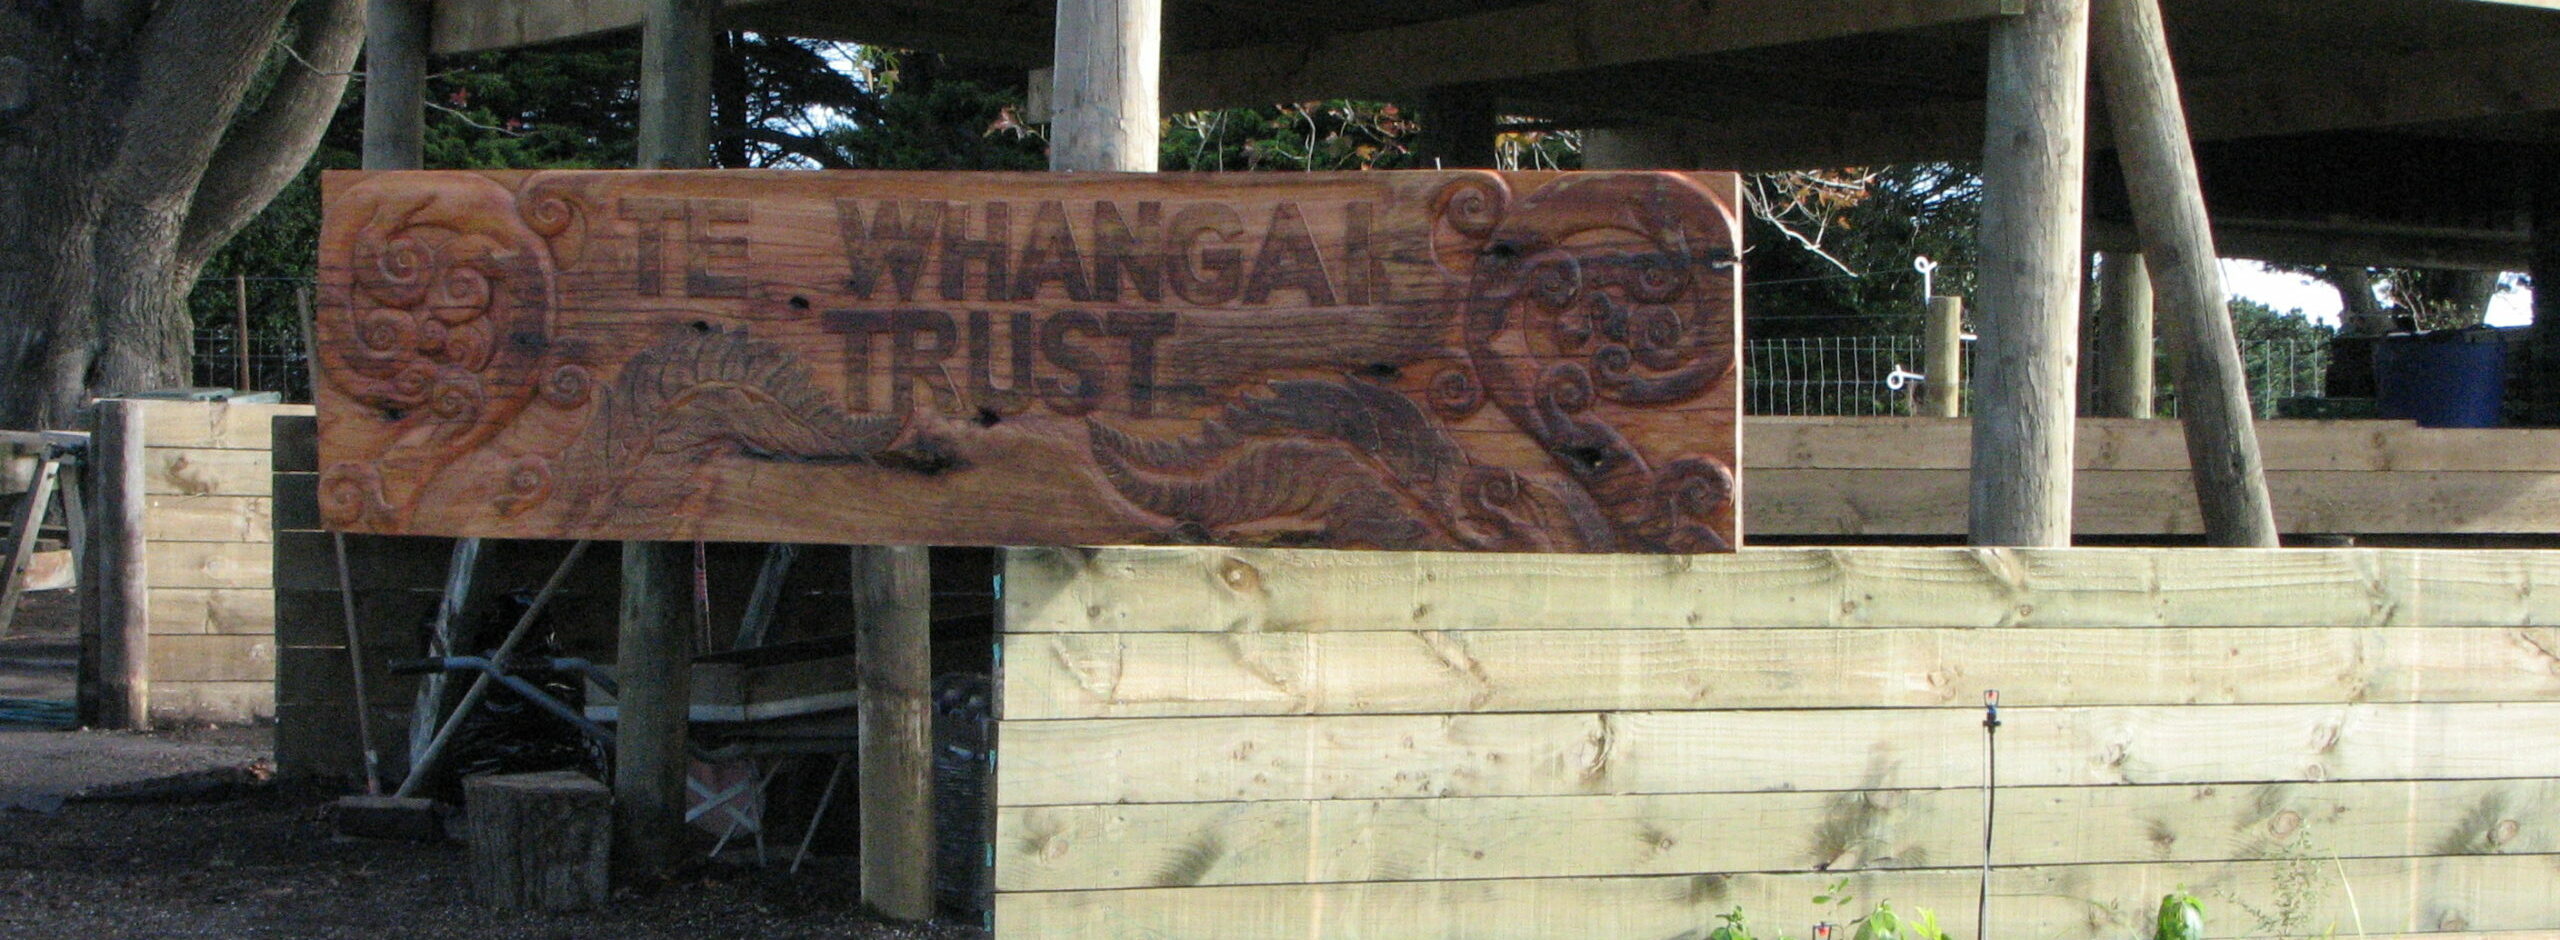 An image of Te Whangai Trust signage carved from a slab of macracarpa by trainees' Whanau.